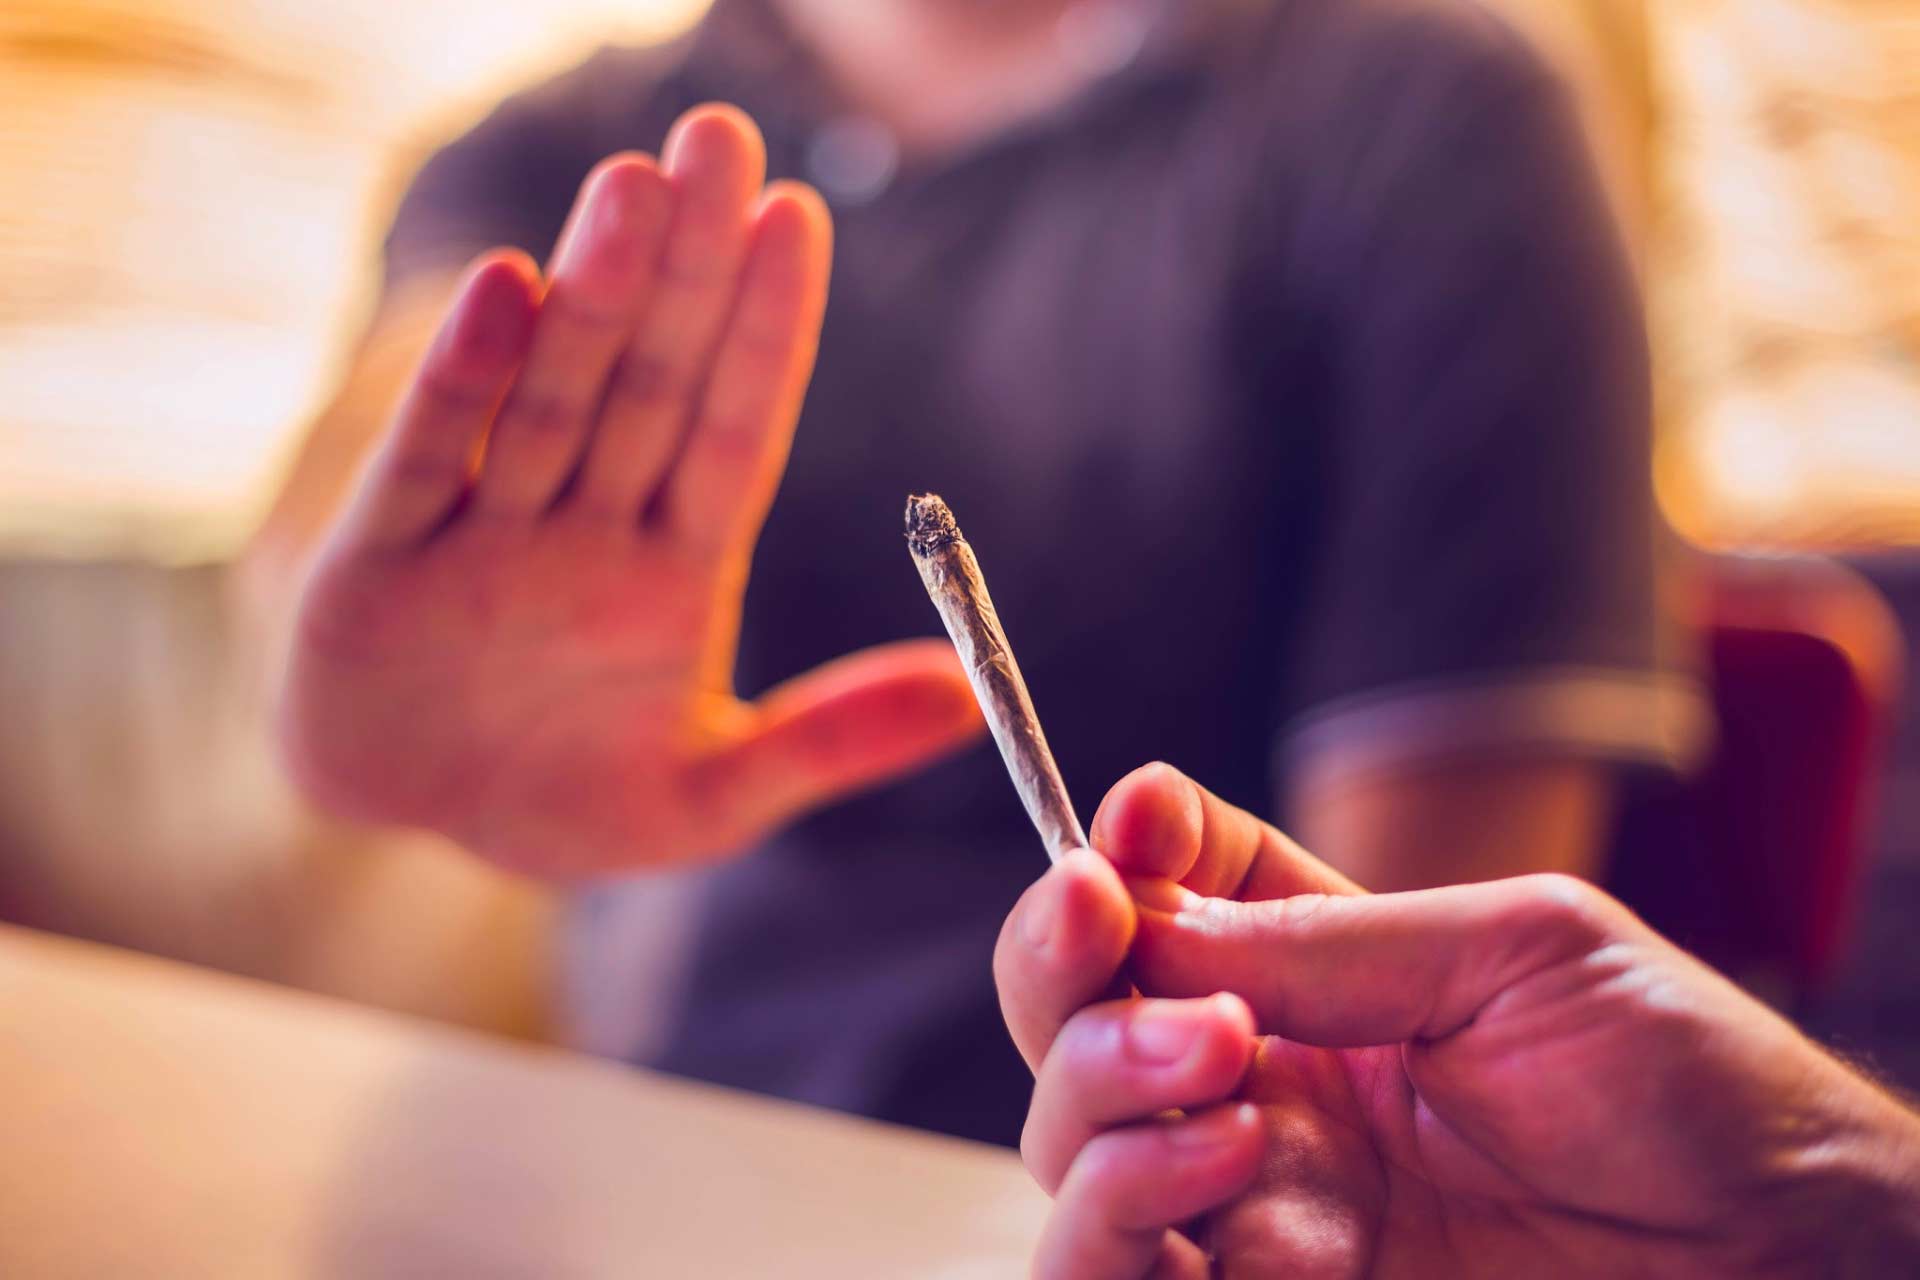 Close-up of hand holding joint offering it to another person, with the other person’s hand up declining, choosing other cannabis consumption methods instead.